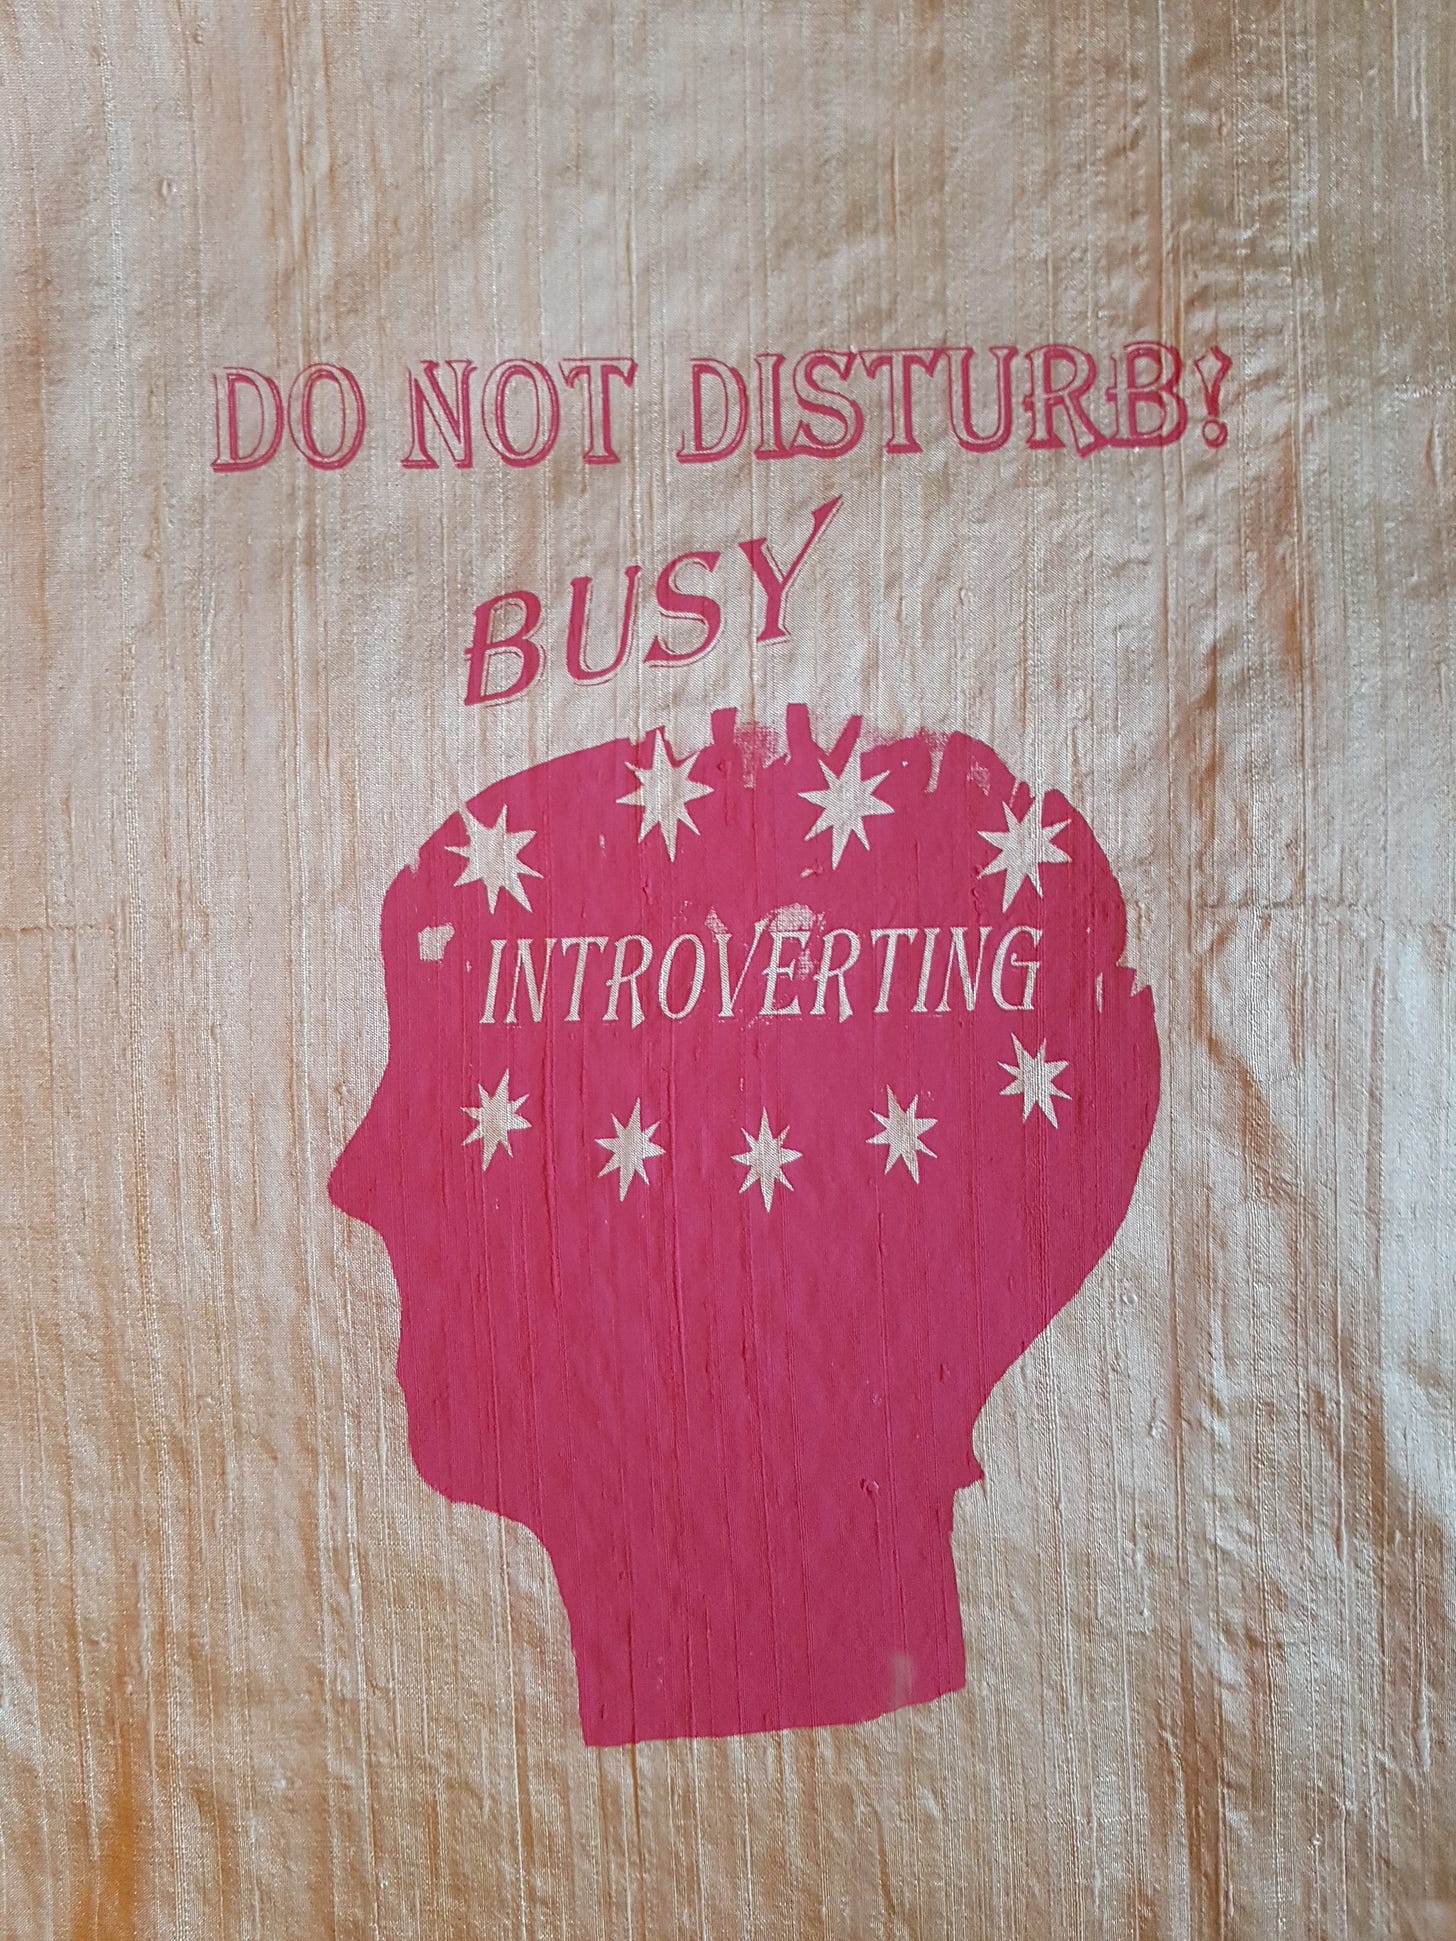 Gocco printed design on silk fabric shows pink text 'Do not disturb, busy, introverting!' with head in profile.